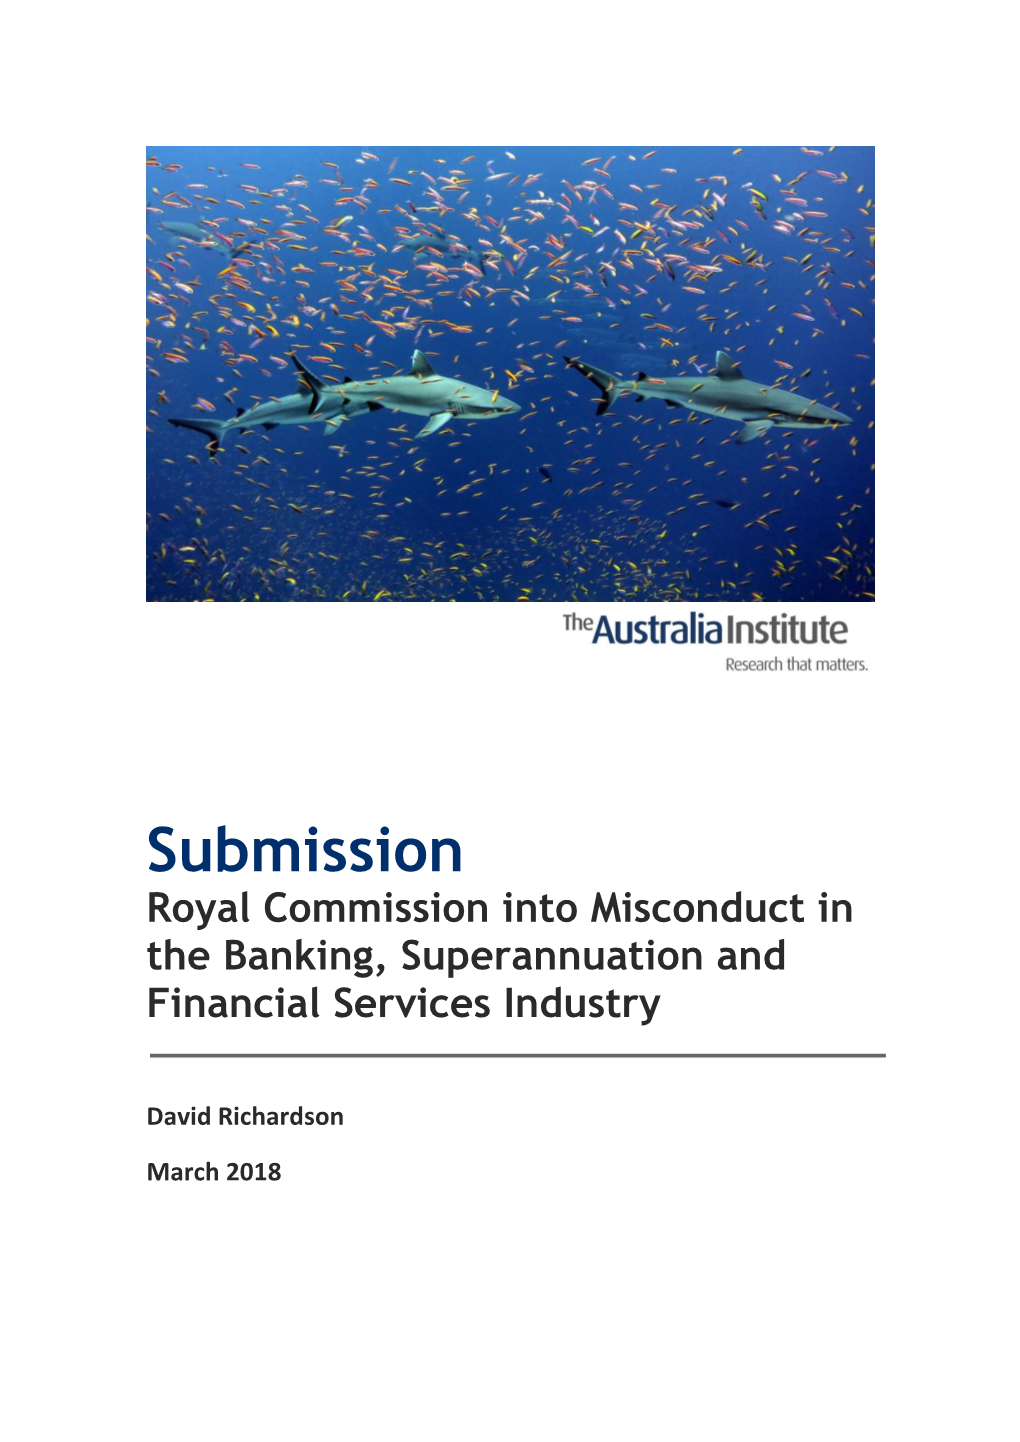 Submission Royal Commission Into Misconduct in the Banking, Superannuation and Financial Services Industry